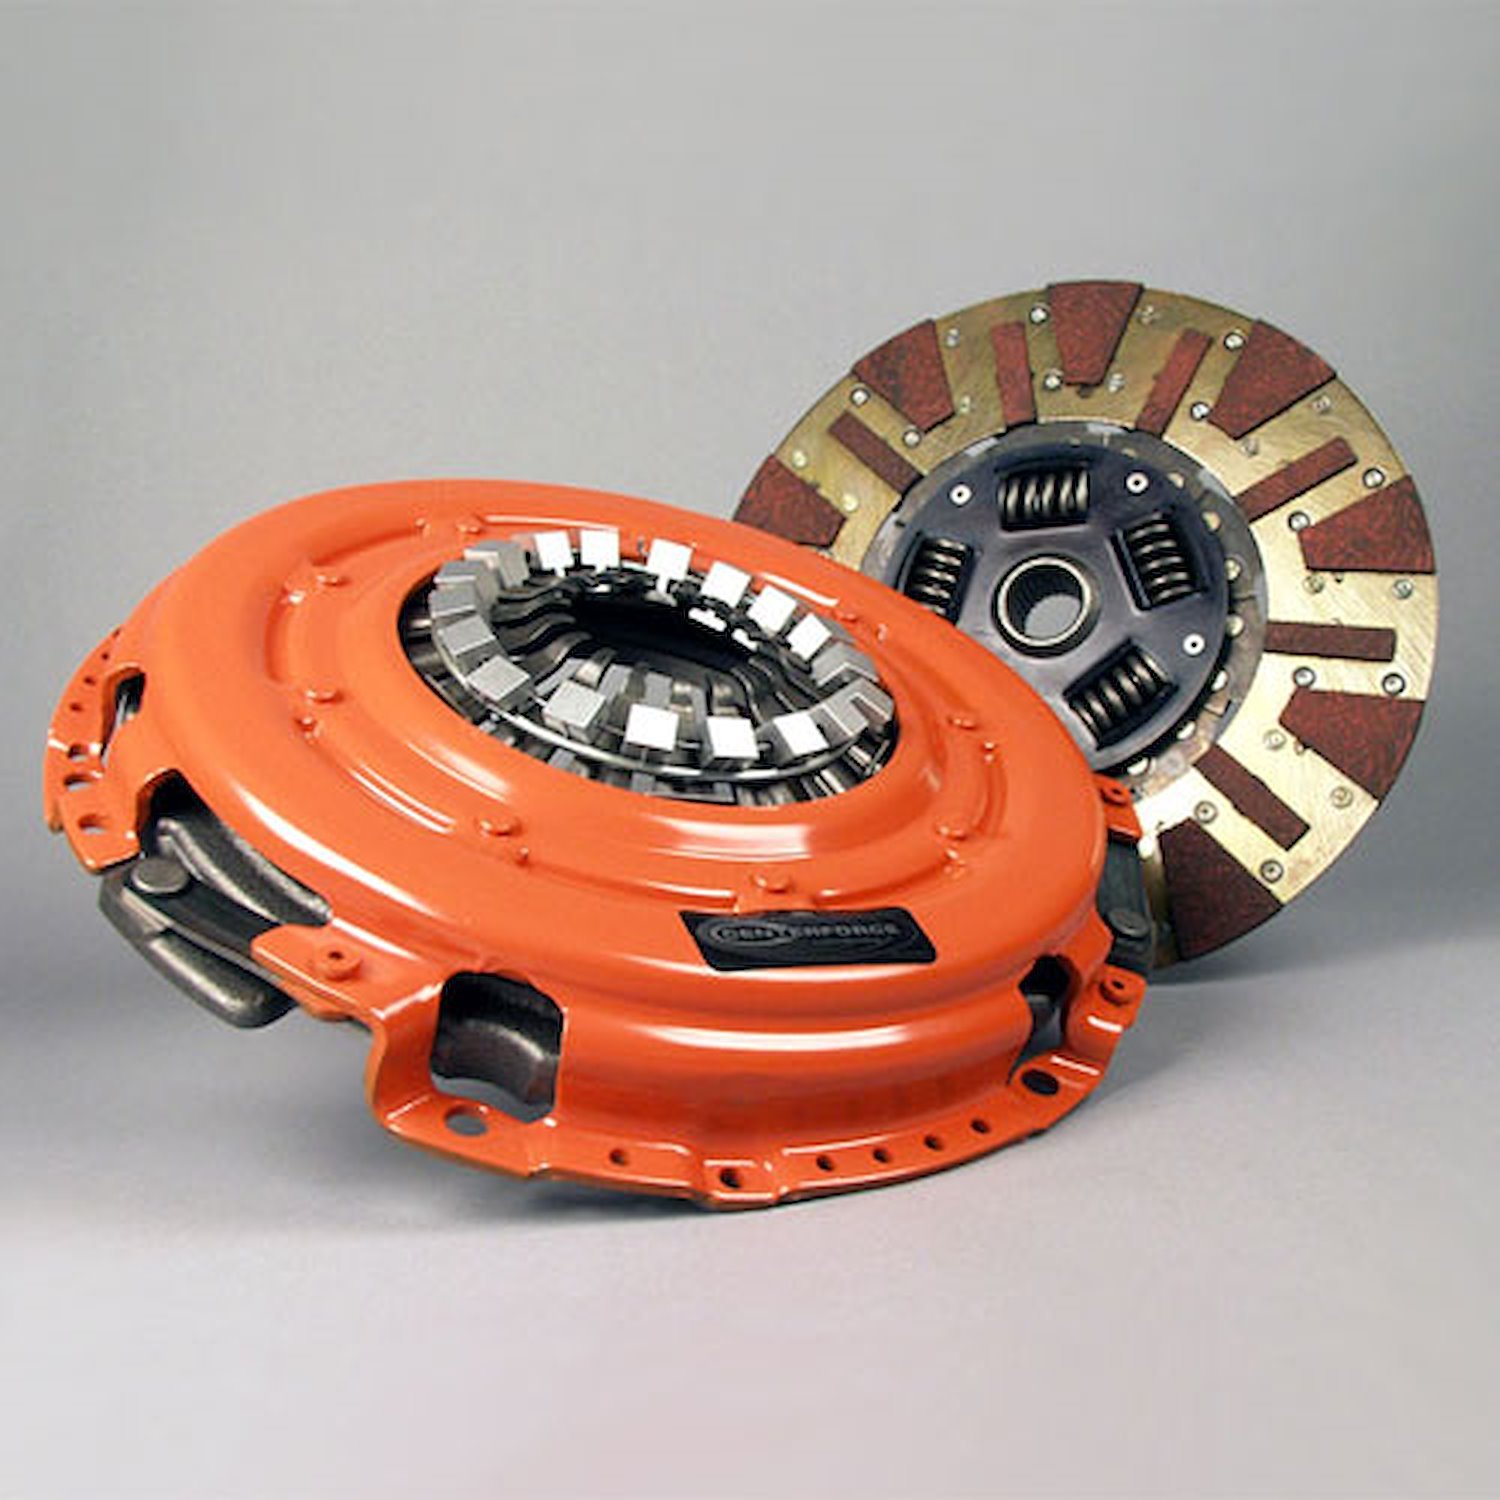 Dual Friction Clutch Includes Pressure Plate, Disc, Flywheel,